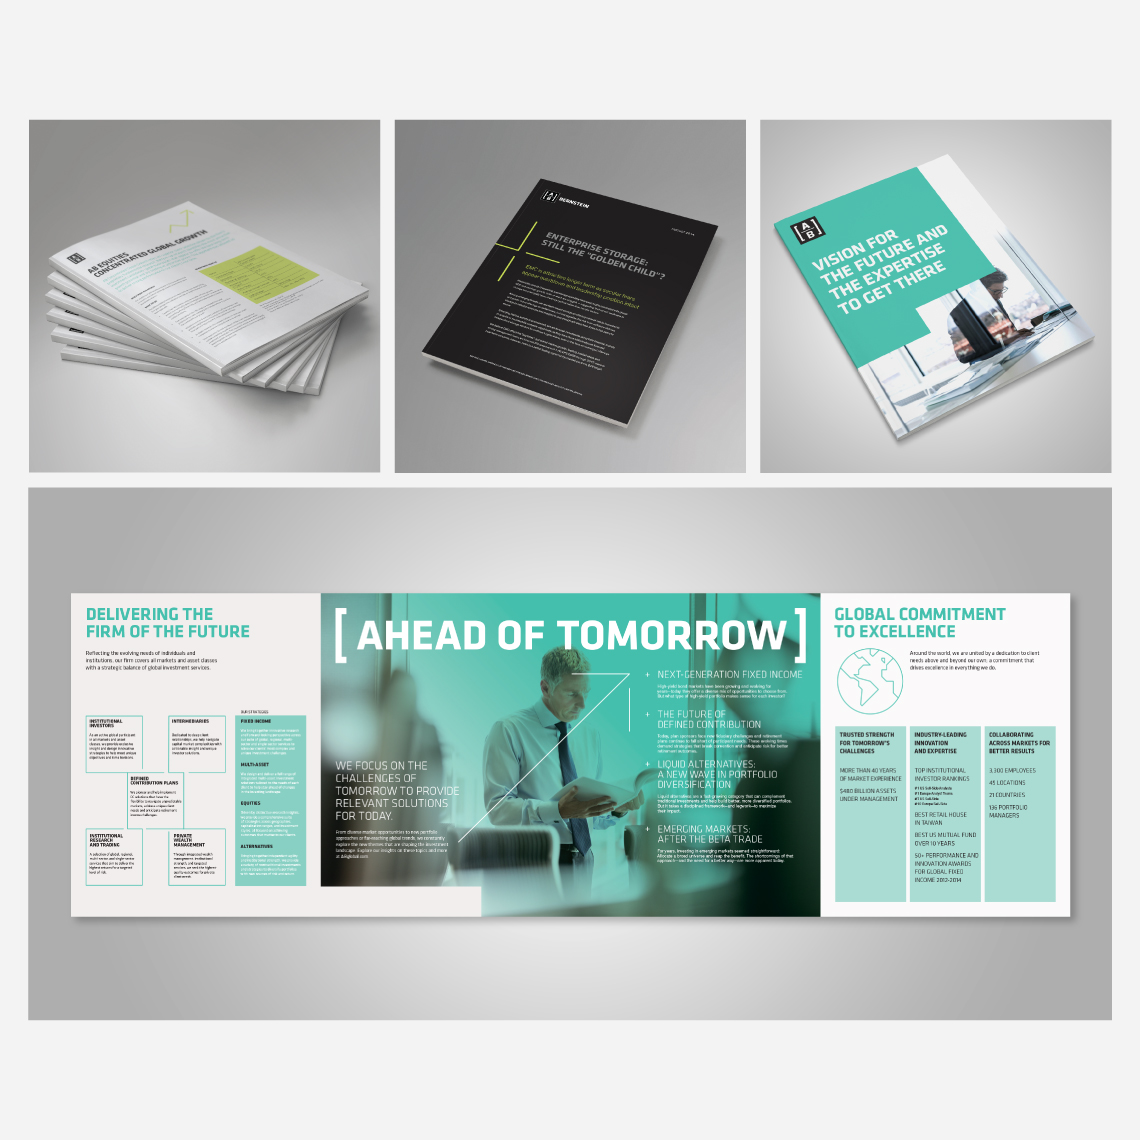 Examples of printed material and branded brochures developed for AB (AllianceBernstein)